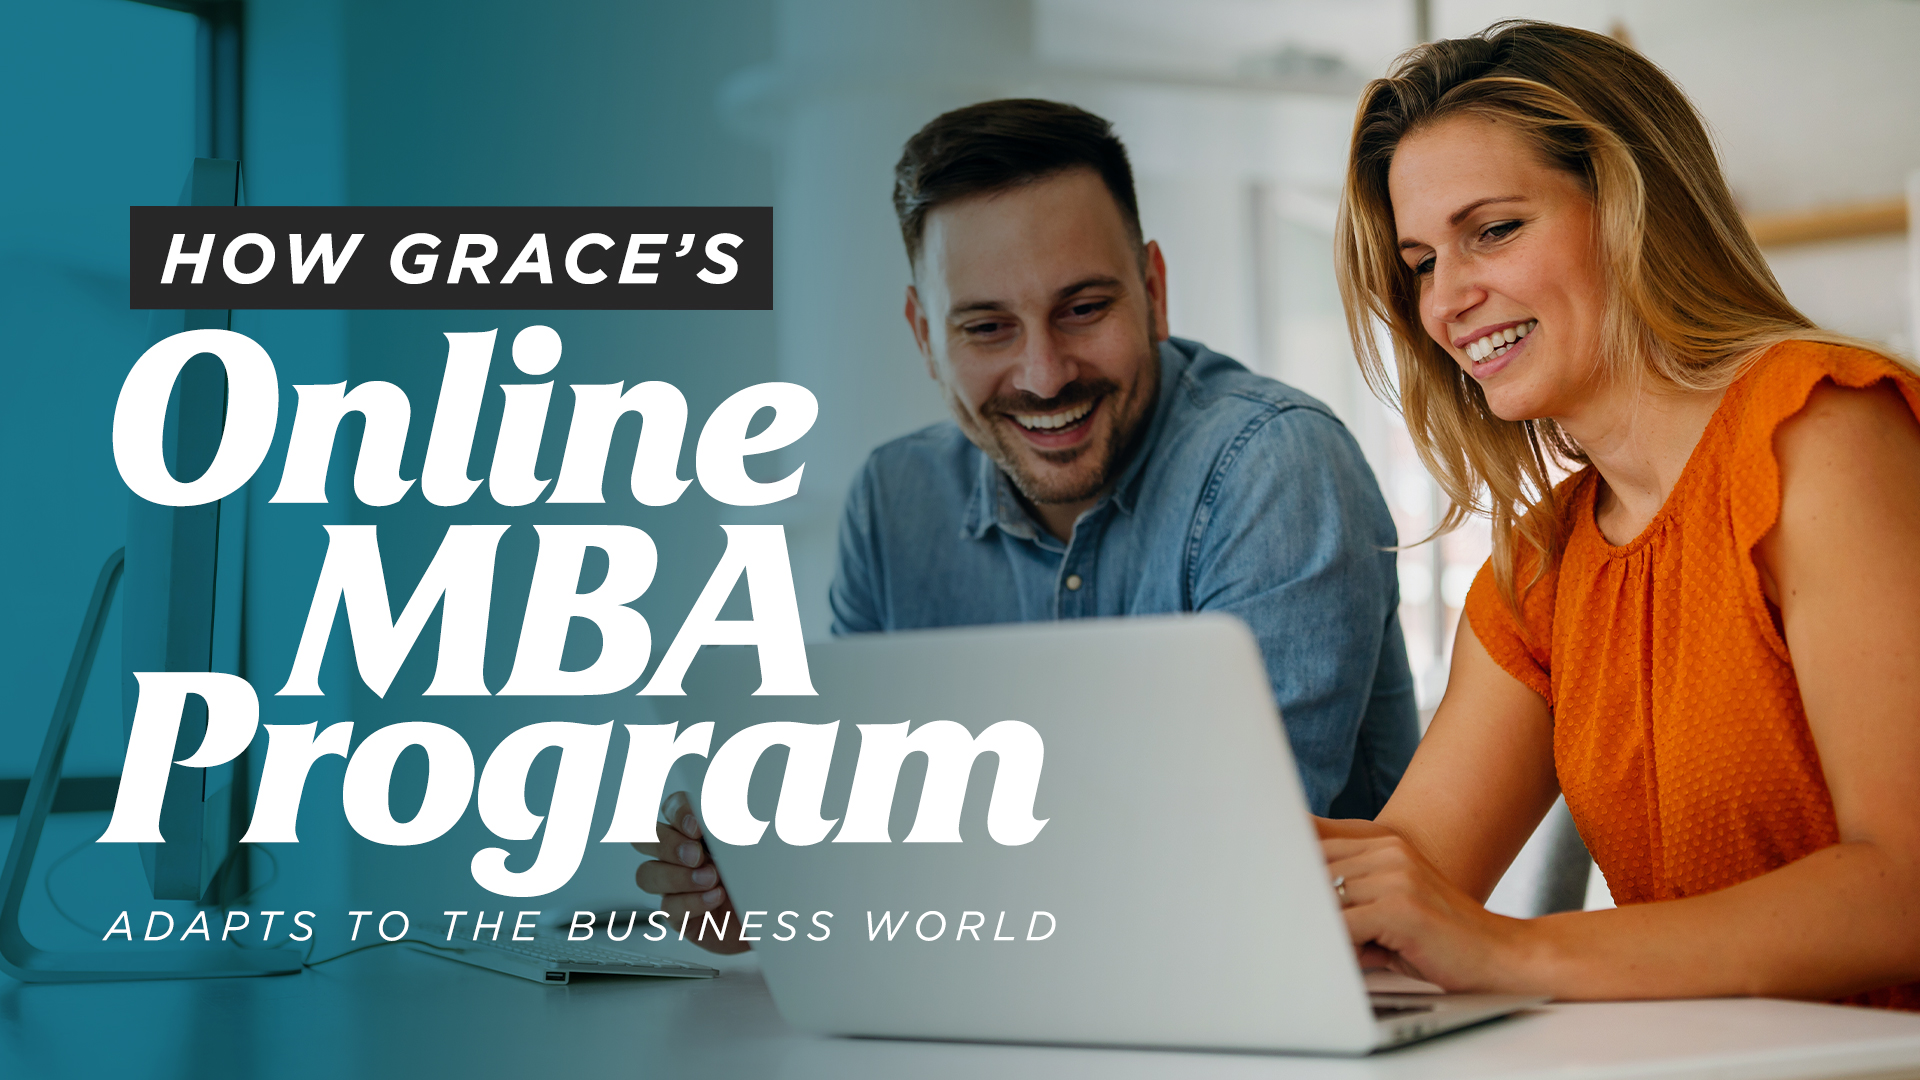 How Grace's Online MBA Program Adapts to the Business World